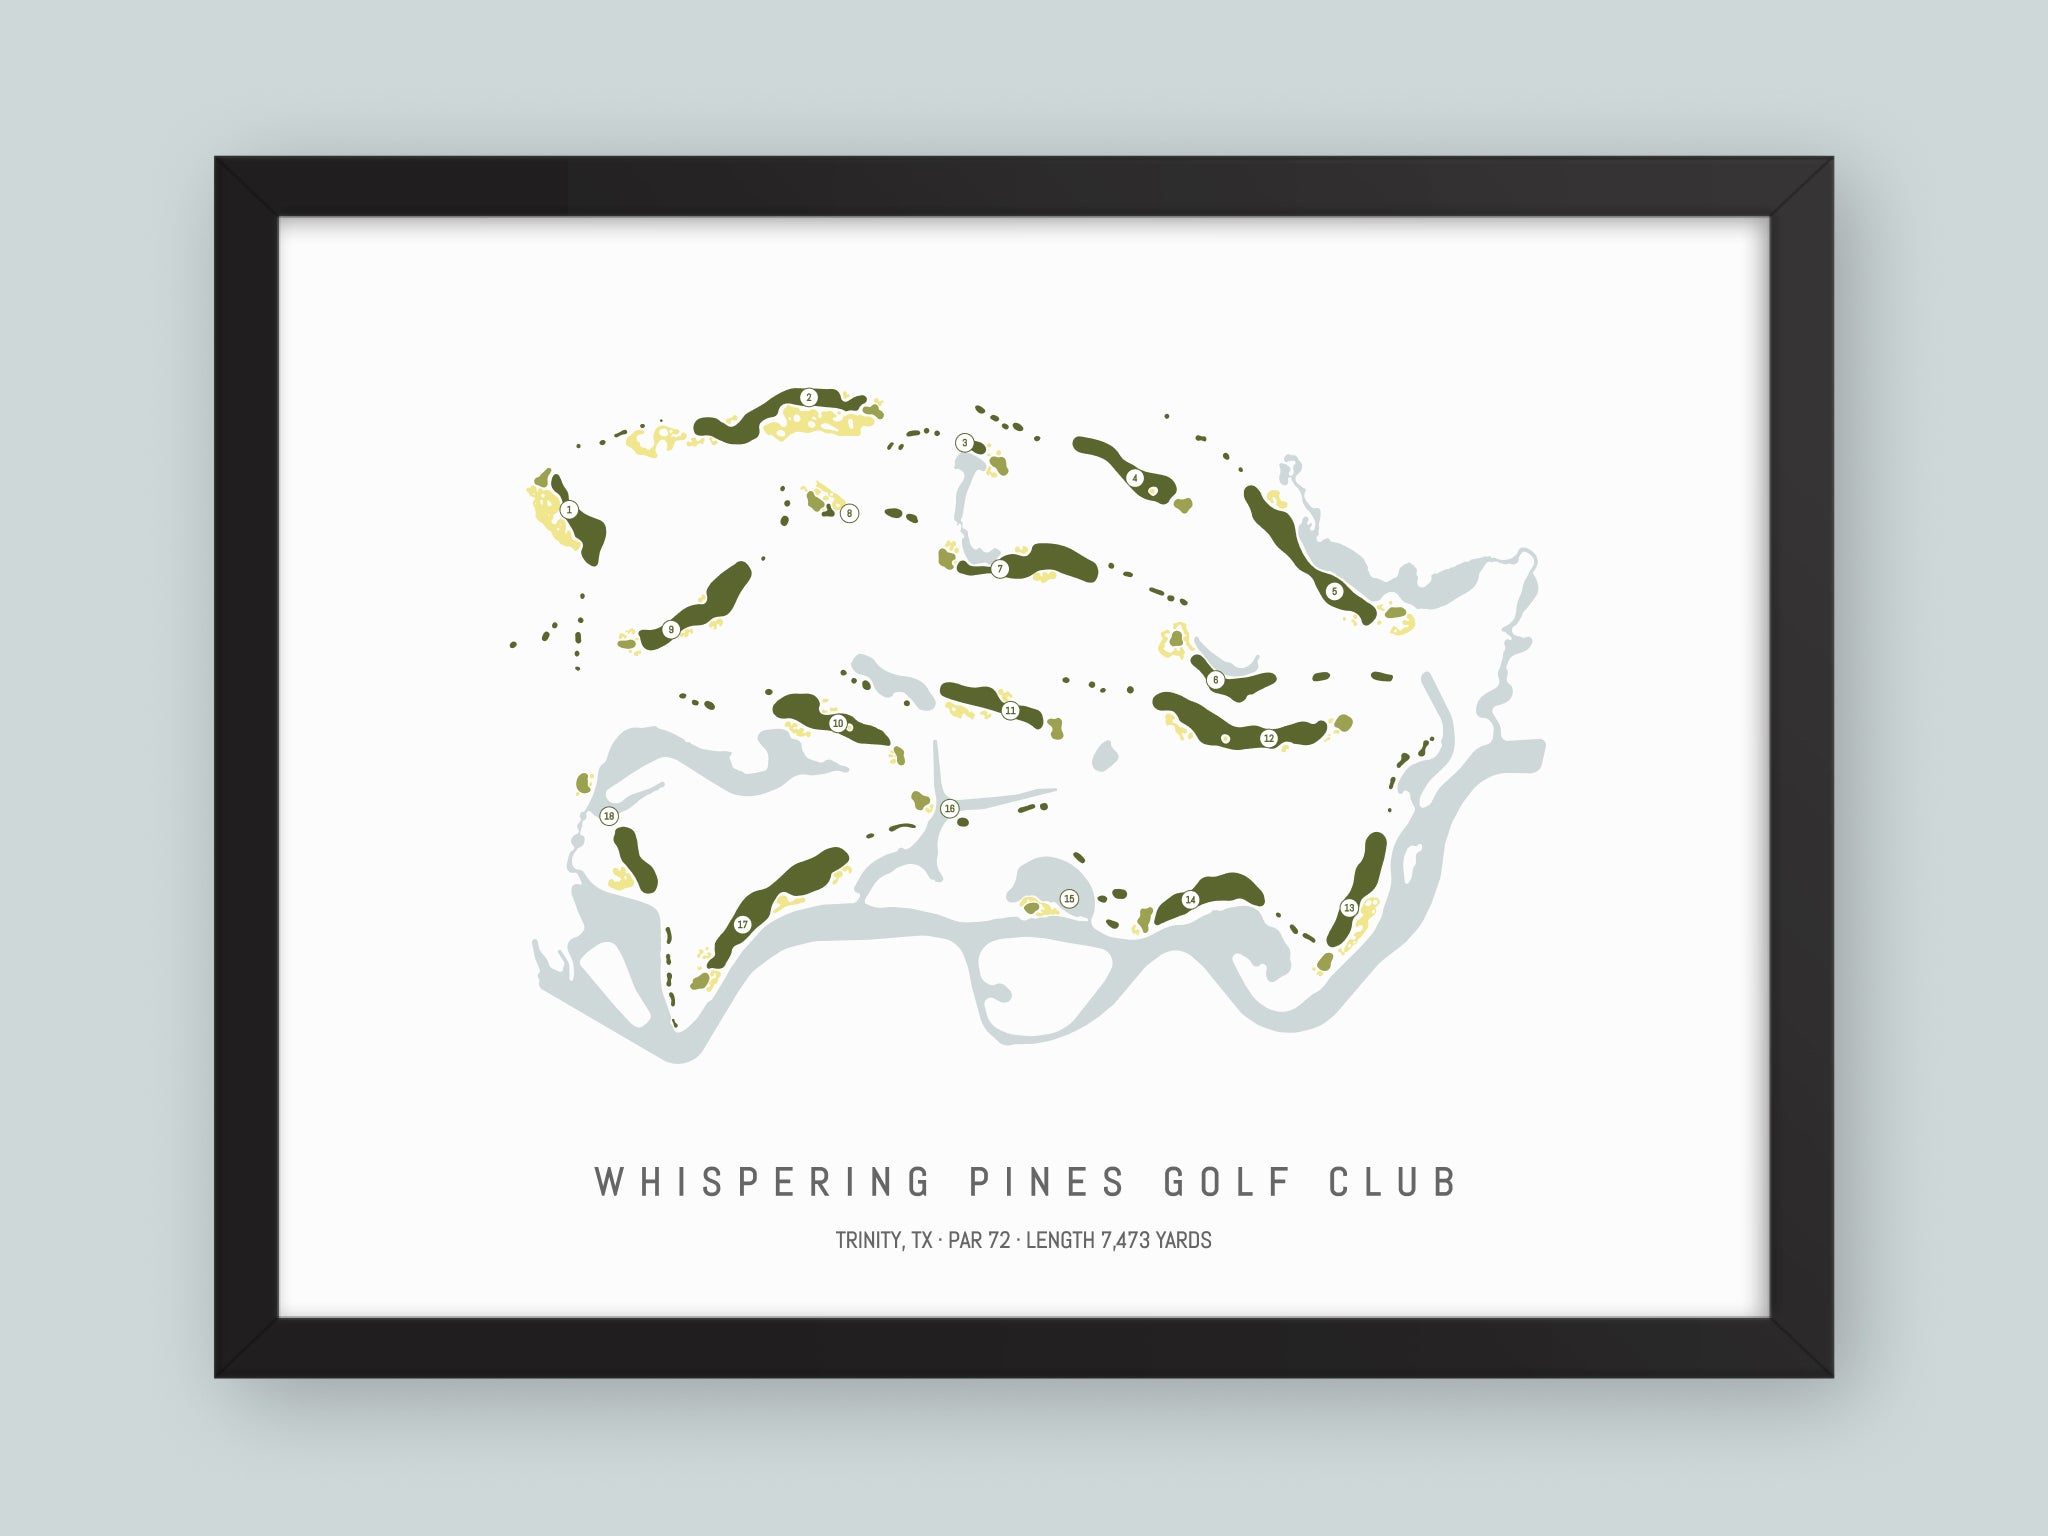 Whispering-Pines-Golf-Club-TX--Black-Frame-24x18-With-Hole-Numbers